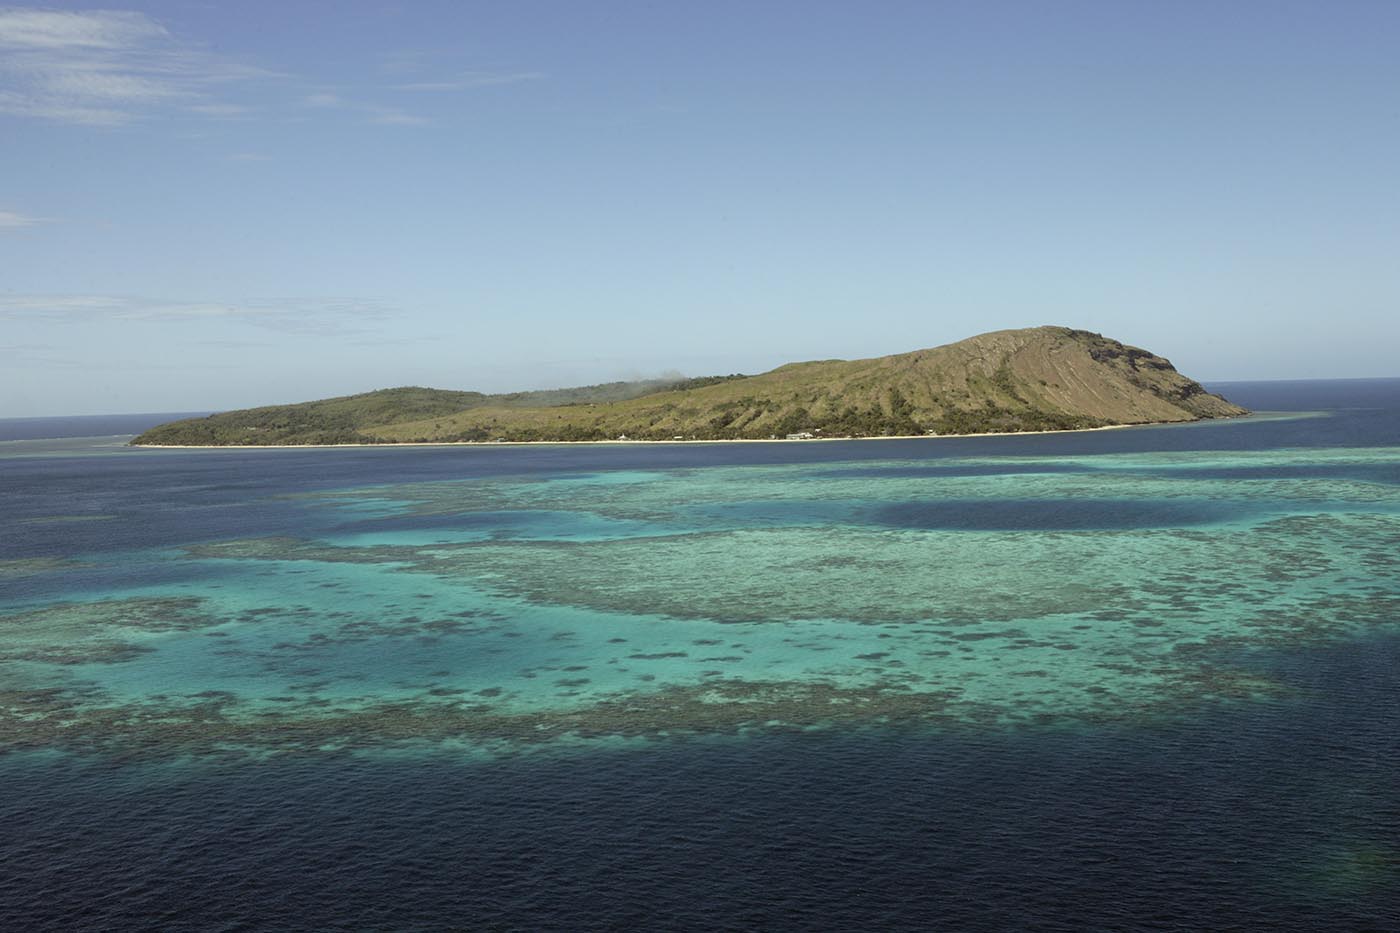 Aerial photo of a small island with reef in foreground.